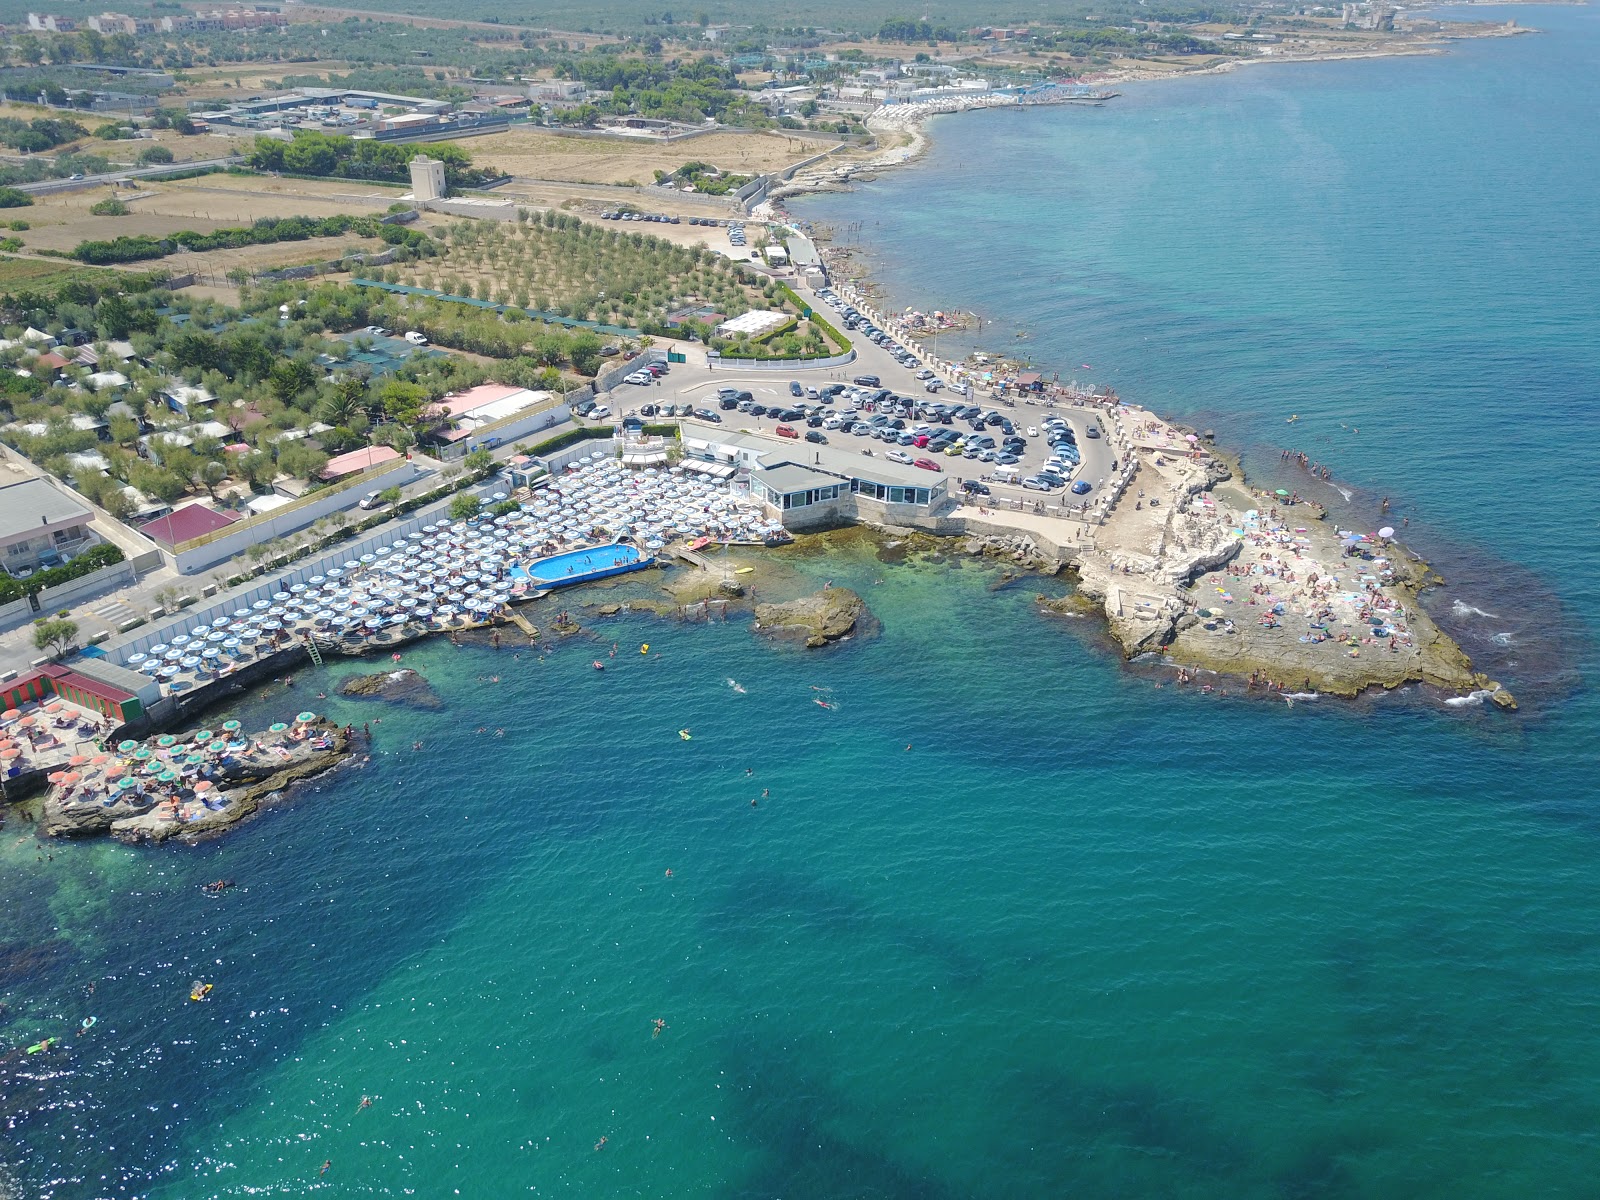 Photo of Lido Apulia with very clean level of cleanliness